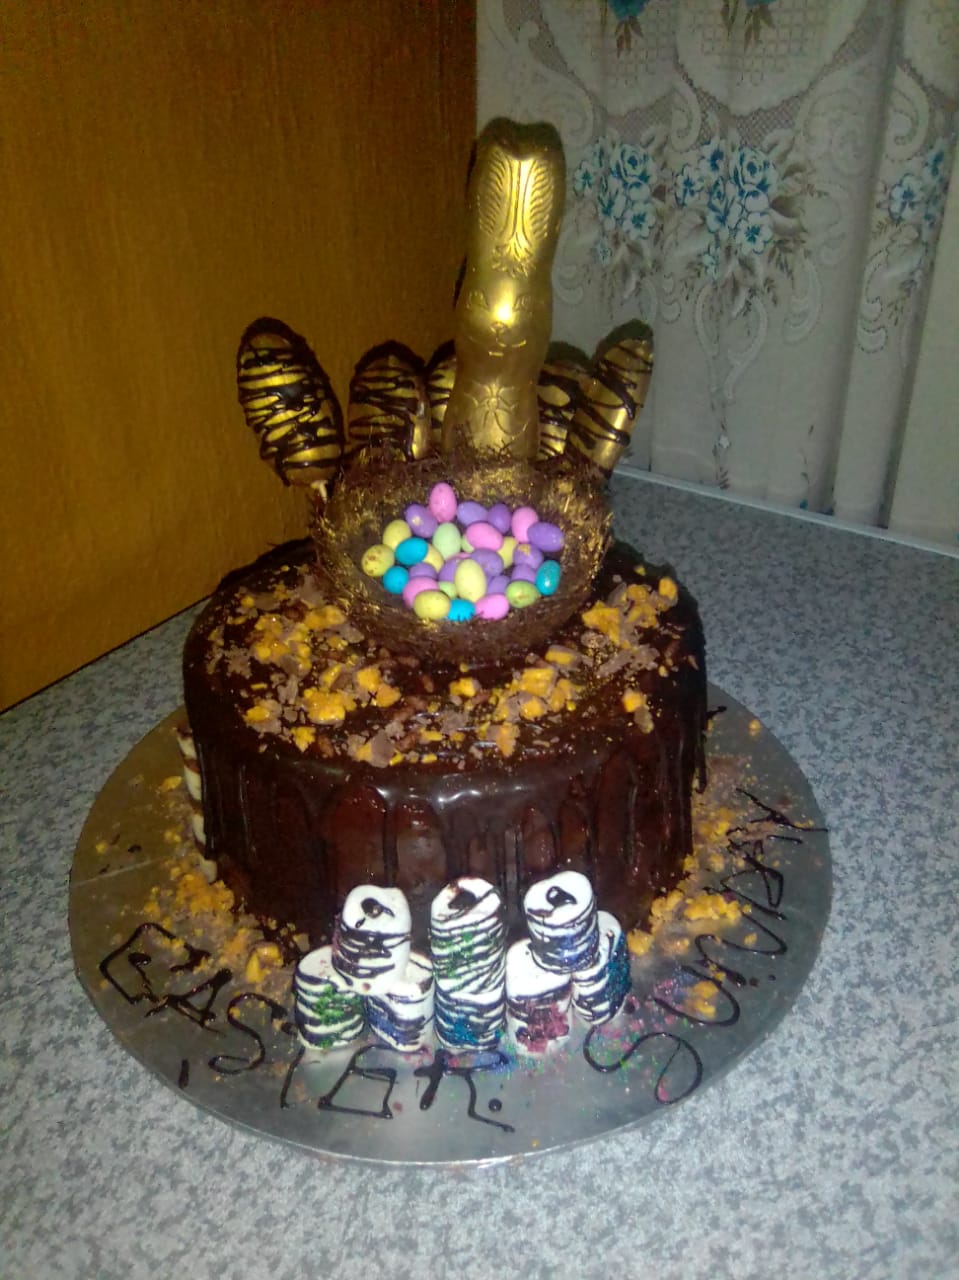 3 layer Chocolate buttercream Easter cake .with desirable toppings priced at R230.